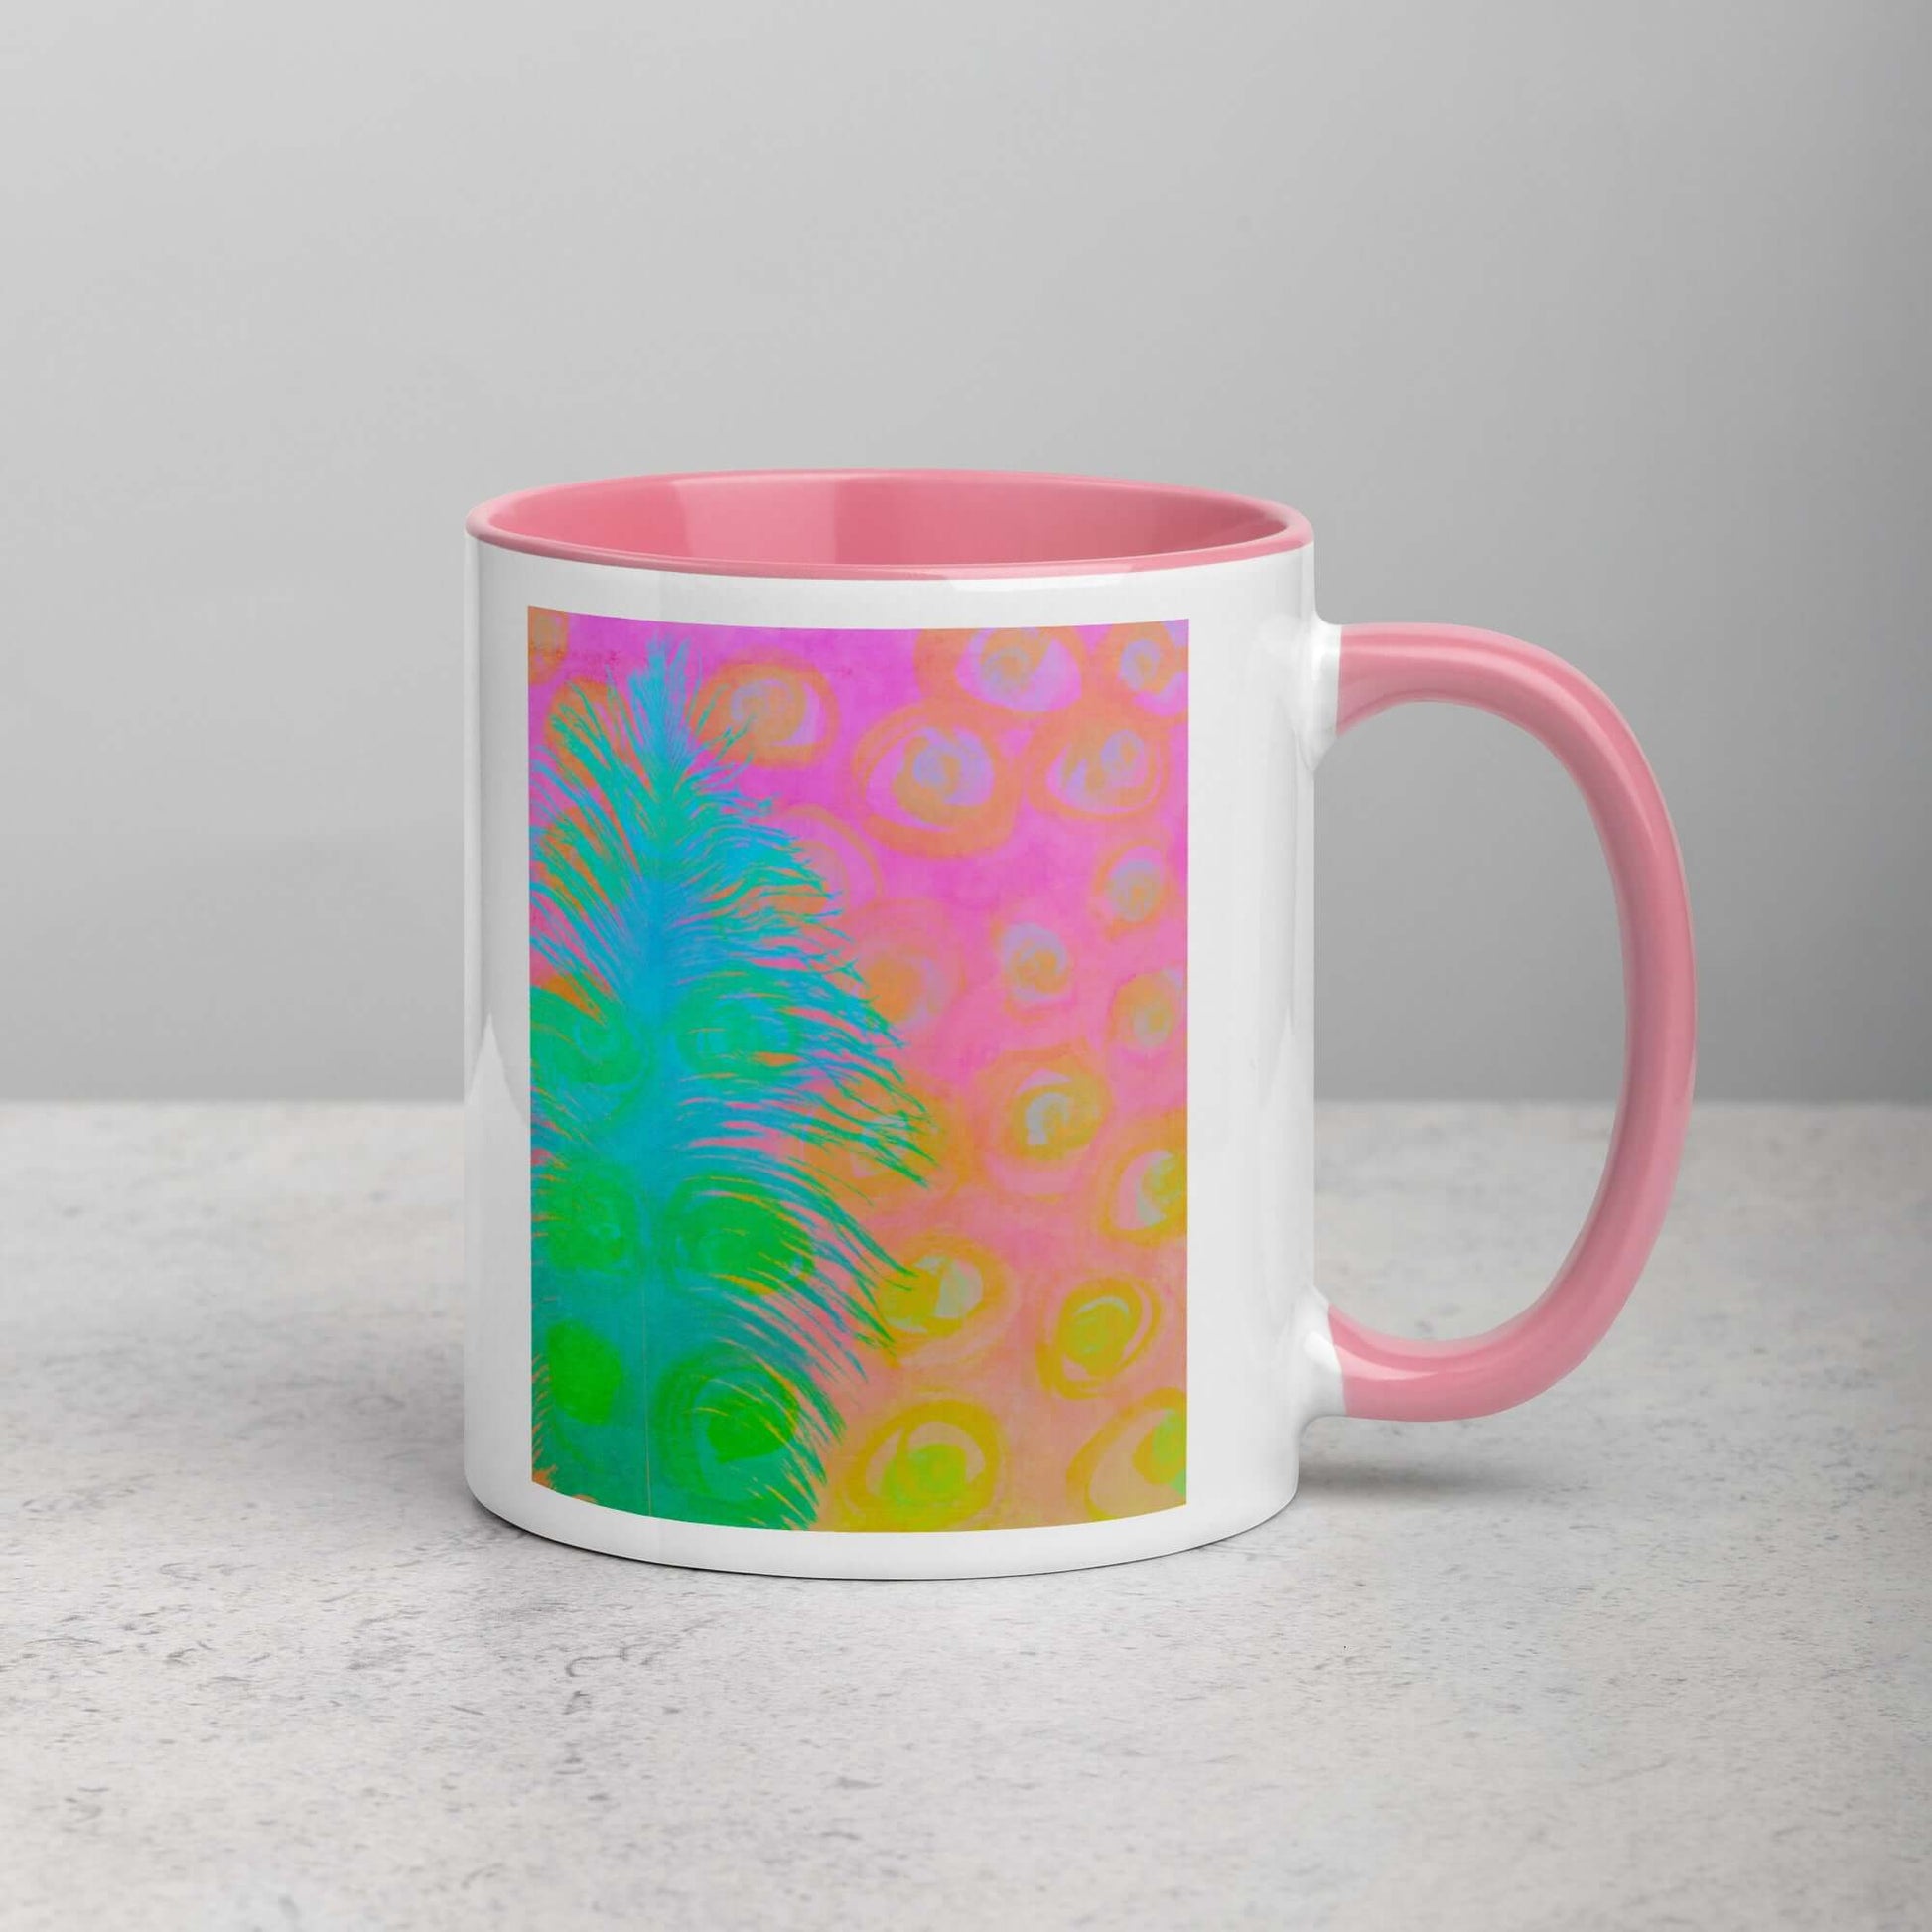 Bright Blue-Green Ostrich Feather on Pink and Yellow Background “My Other Half” Abstract Art Mug with Light Pink Color Inside Right Handed Front View